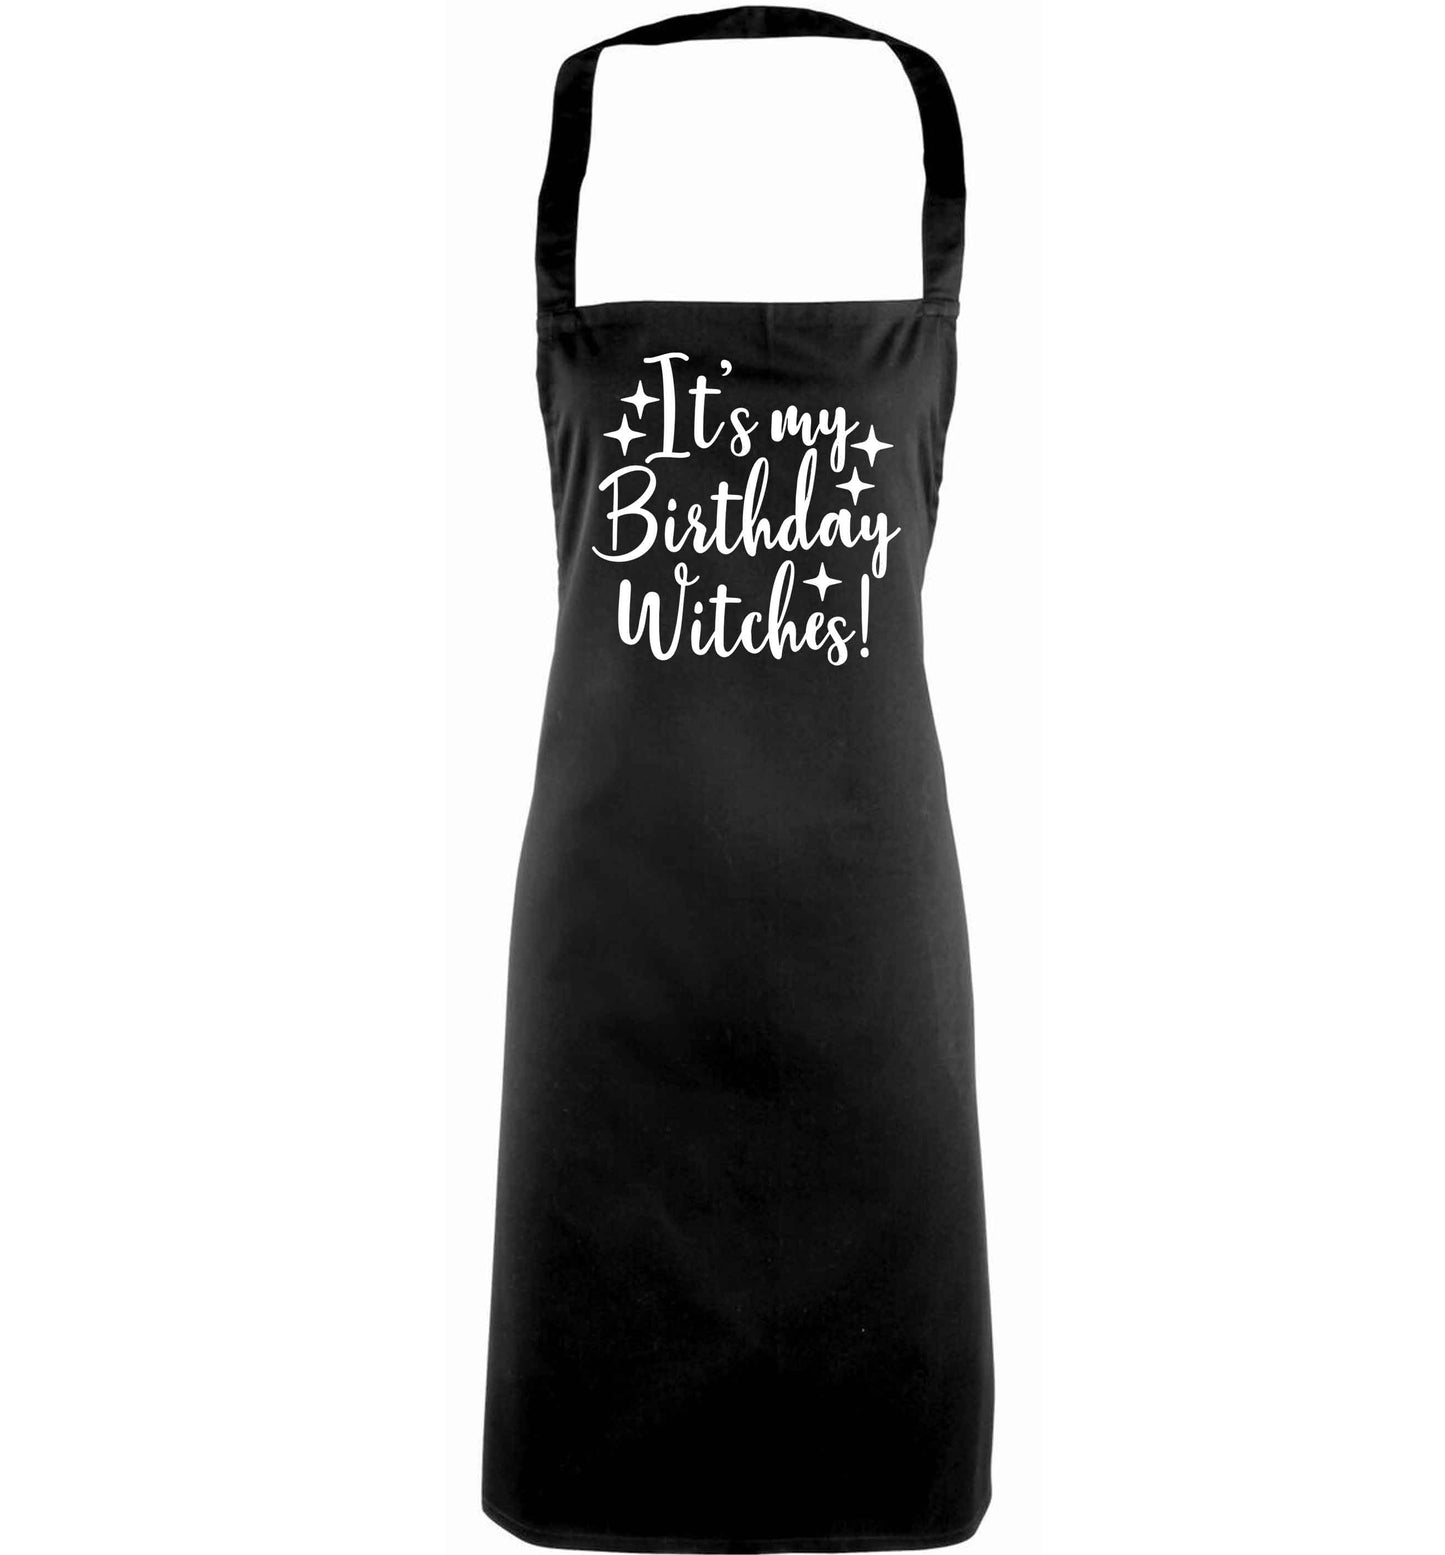 It's my birthday witches!adults black apron